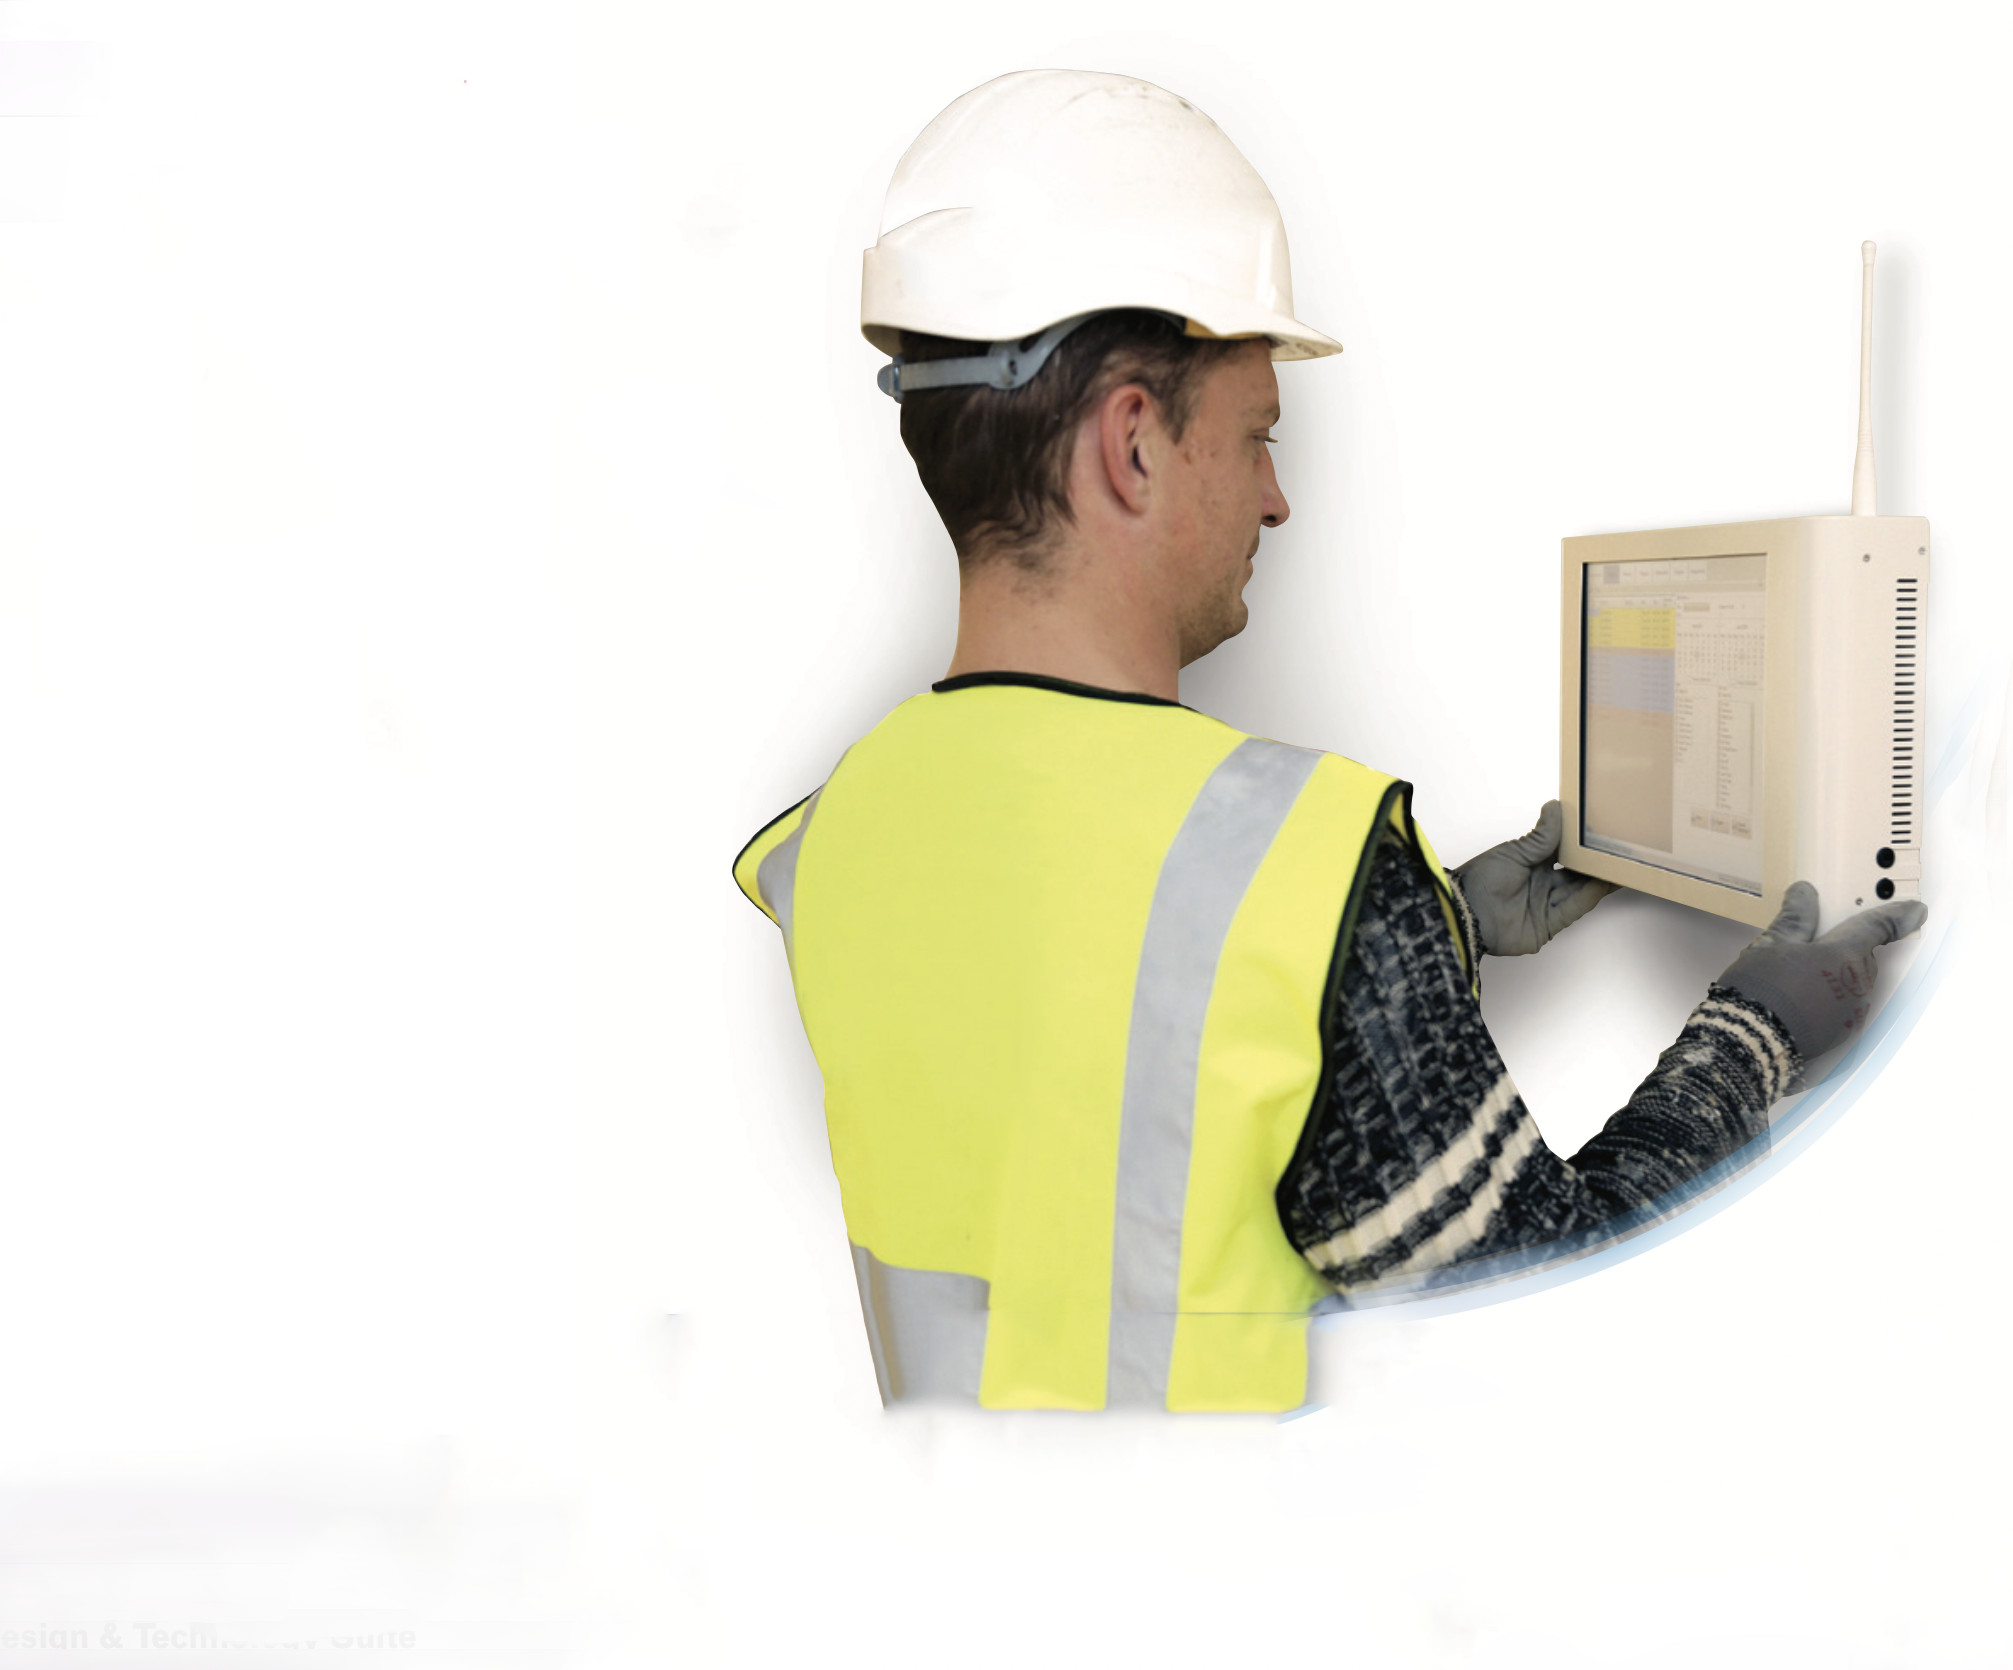 A person wearing a safety vest and gloves installation communication device on wall